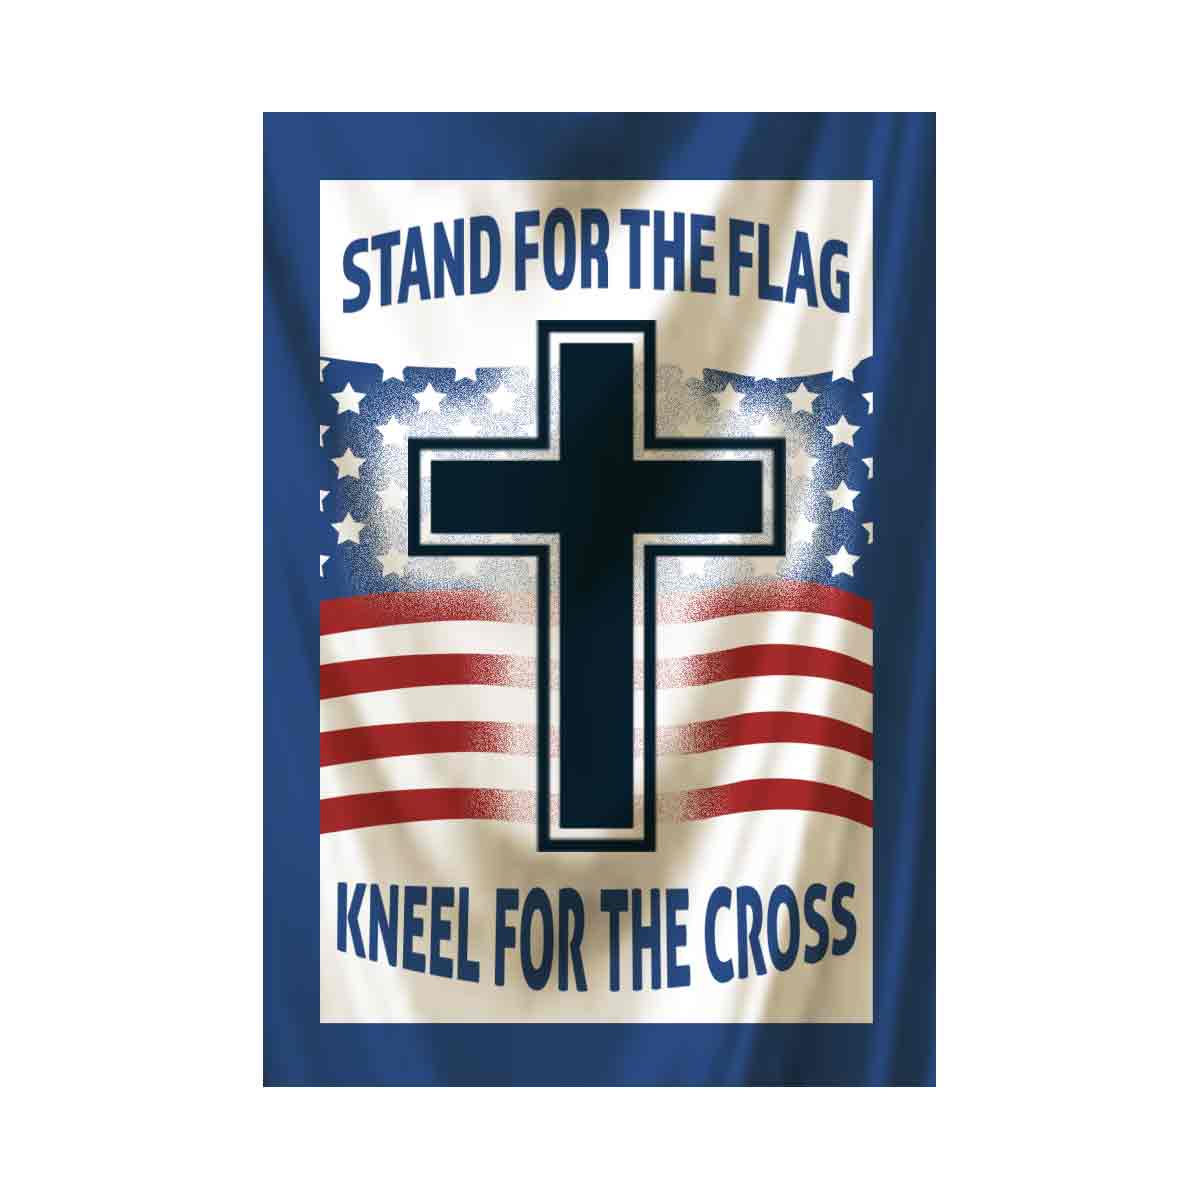 Stand for the flag